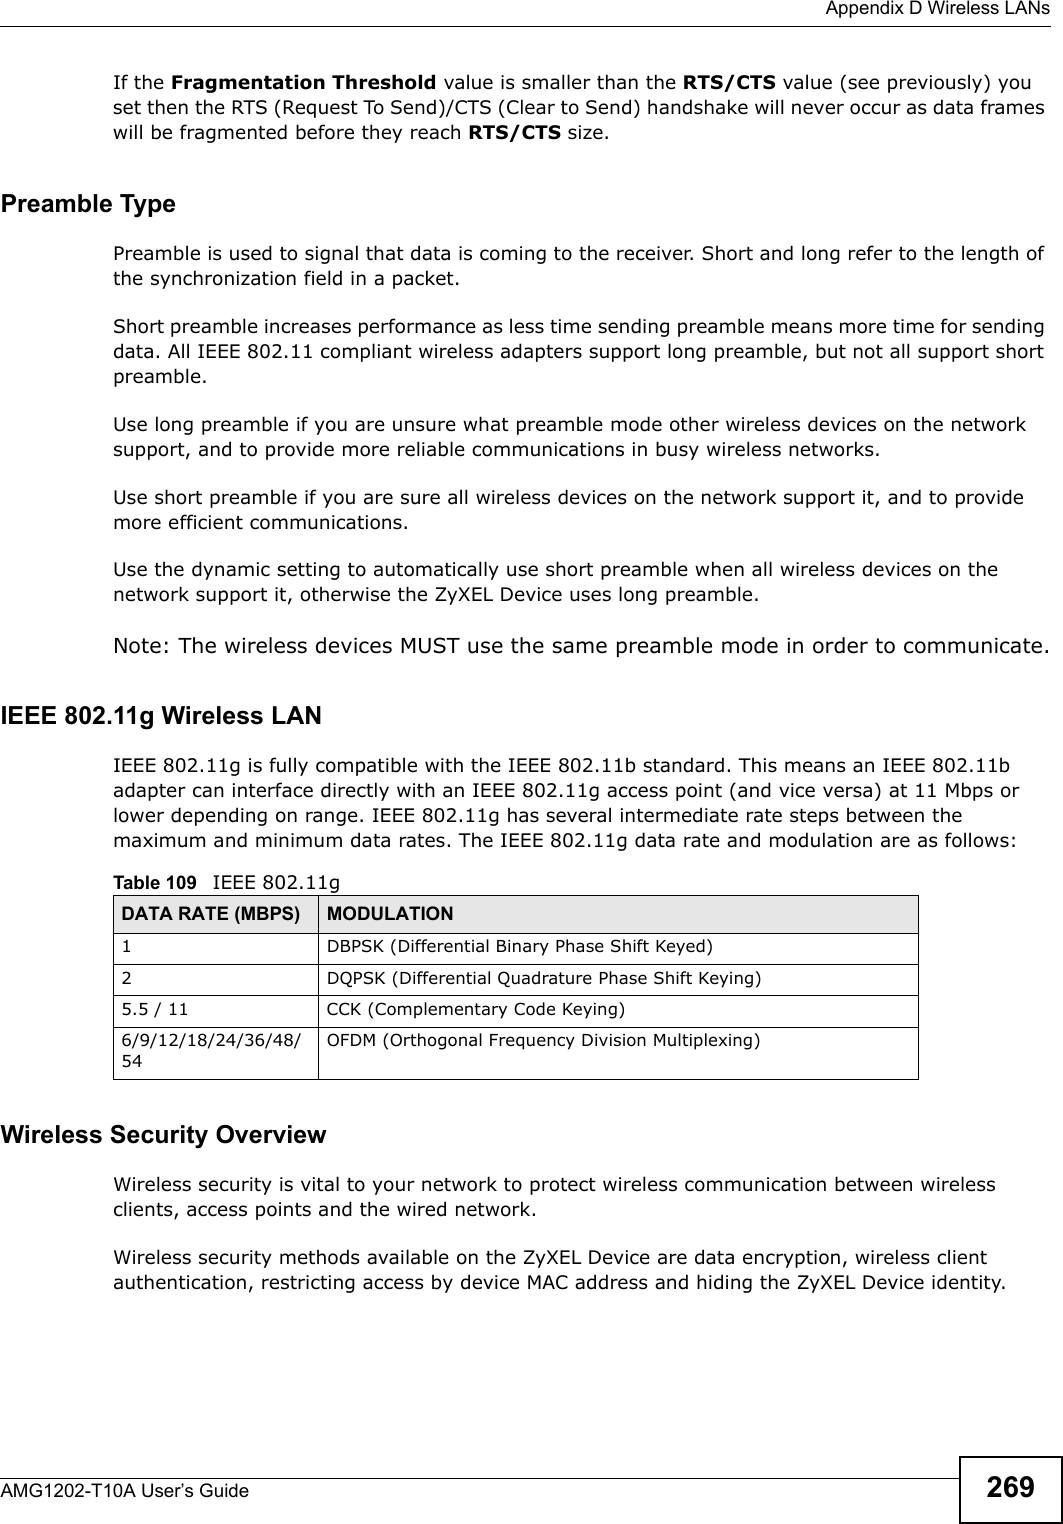  Appendix D Wireless LANsAMG1202-T10A User’s Guide 269If the Fragmentation Threshold value is smaller than the RTS/CTS value (see previously) you set then the RTS (Request To Send)/CTS (Clear to Send) handshake will never occur as data frames will be fragmented before they reach RTS/CTS size.Preamble TypePreamble is used to signal that data is coming to the receiver. Short and long refer to the length of the synchronization field in a packet.Short preamble increases performance as less time sending preamble means more time for sending data. All IEEE 802.11 compliant wireless adapters support long preamble, but not all support short preamble. Use long preamble if you are unsure what preamble mode other wireless devices on the network support, and to provide more reliable communications in busy wireless networks. Use short preamble if you are sure all wireless devices on the network support it, and to provide more efficient communications.Use the dynamic setting to automatically use short preamble when all wireless devices on the network support it, otherwise the ZyXEL Device uses long preamble.Note: The wireless devices MUST use the same preamble mode in order to communicate.IEEE 802.11g Wireless LANIEEE 802.11g is fully compatible with the IEEE 802.11b standard. This means an IEEE 802.11b adapter can interface directly with an IEEE 802.11g access point (and vice versa) at 11 Mbps or lower depending on range. IEEE 802.11g has several intermediate rate steps between the maximum and minimum data rates. The IEEE 802.11g data rate and modulation are as follows:Wireless Security OverviewWireless security is vital to your network to protect wireless communication between wireless clients, access points and the wired network.Wireless security methods available on the ZyXEL Device are data encryption, wireless client authentication, restricting access by device MAC address and hiding the ZyXEL Device identity.Table 109   IEEE 802.11gDATA RATE (MBPS) MODULATION1 DBPSK (Differential Binary Phase Shift Keyed)2 DQPSK (Differential Quadrature Phase Shift Keying)5.5 / 11 CCK (Complementary Code Keying) 6/9/12/18/24/36/48/54OFDM (Orthogonal Frequency Division Multiplexing) 